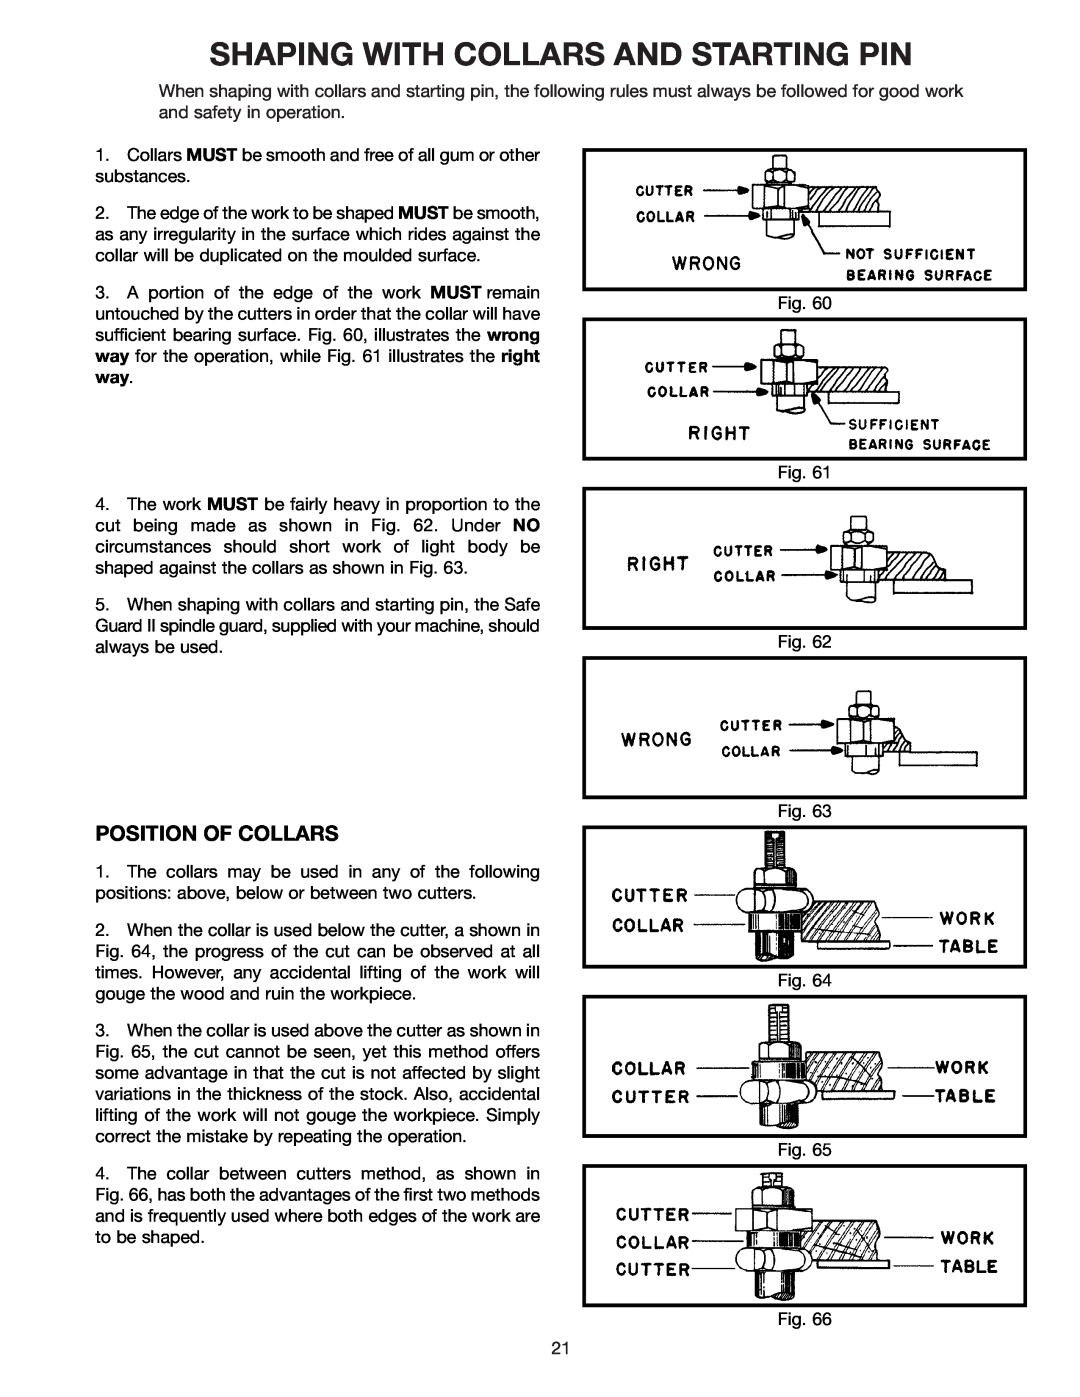 Delta 43-424 instruction manual Shaping With Collars And Starting Pin, Position Of Collars 